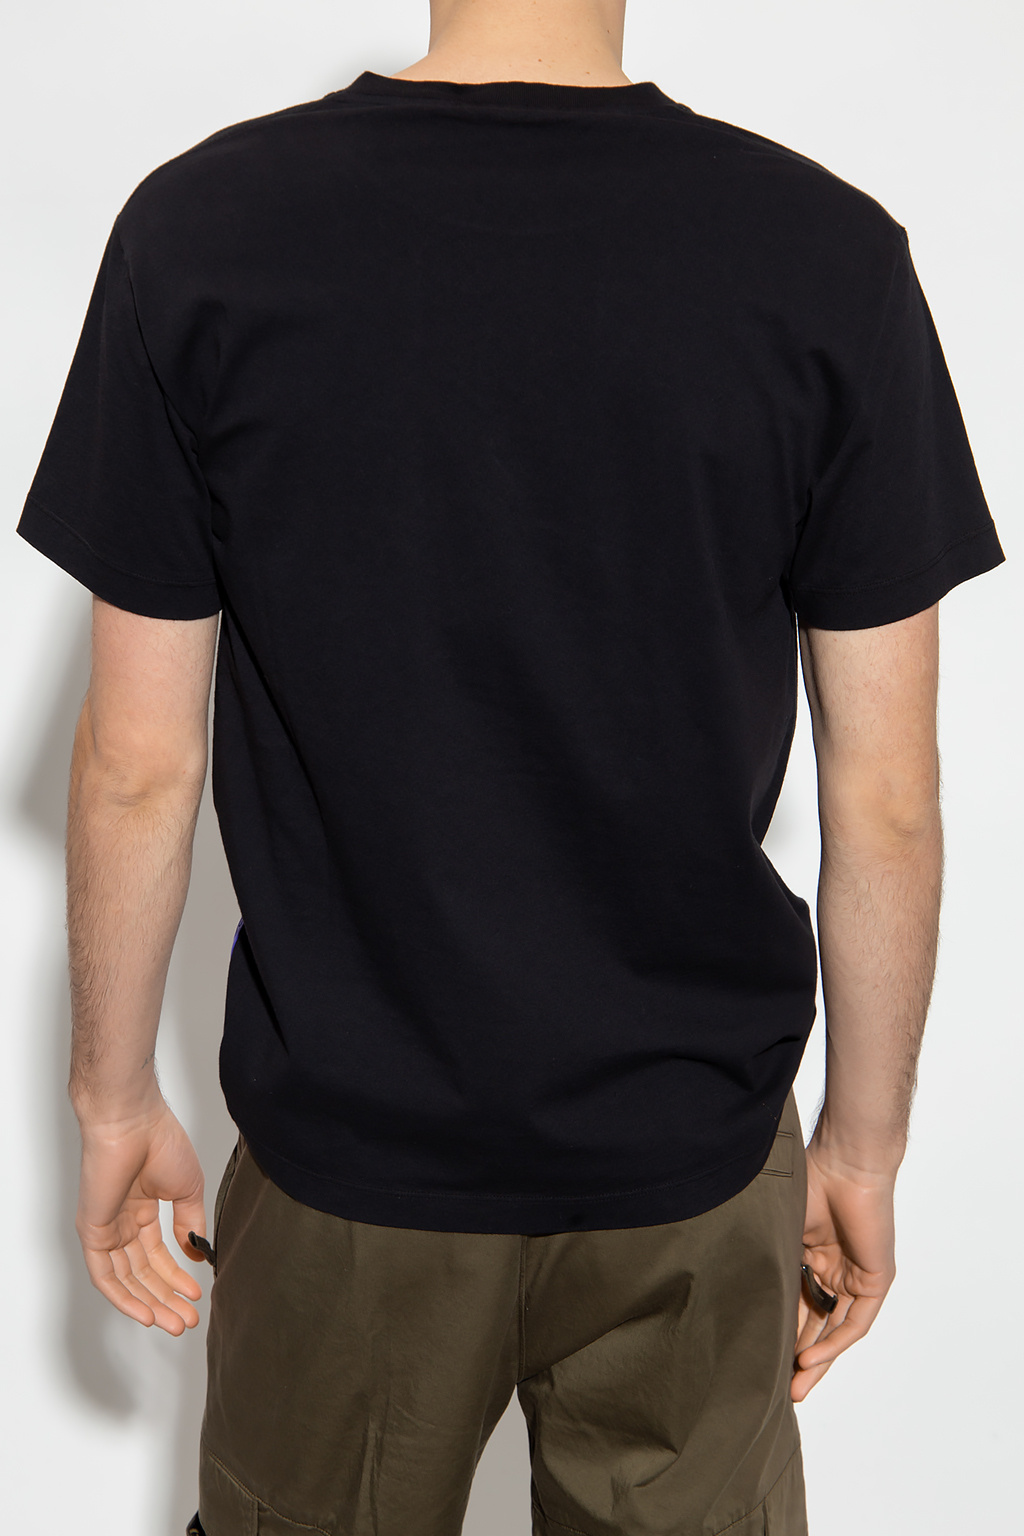 Stone Island Native Youth logo front t-shirt in black